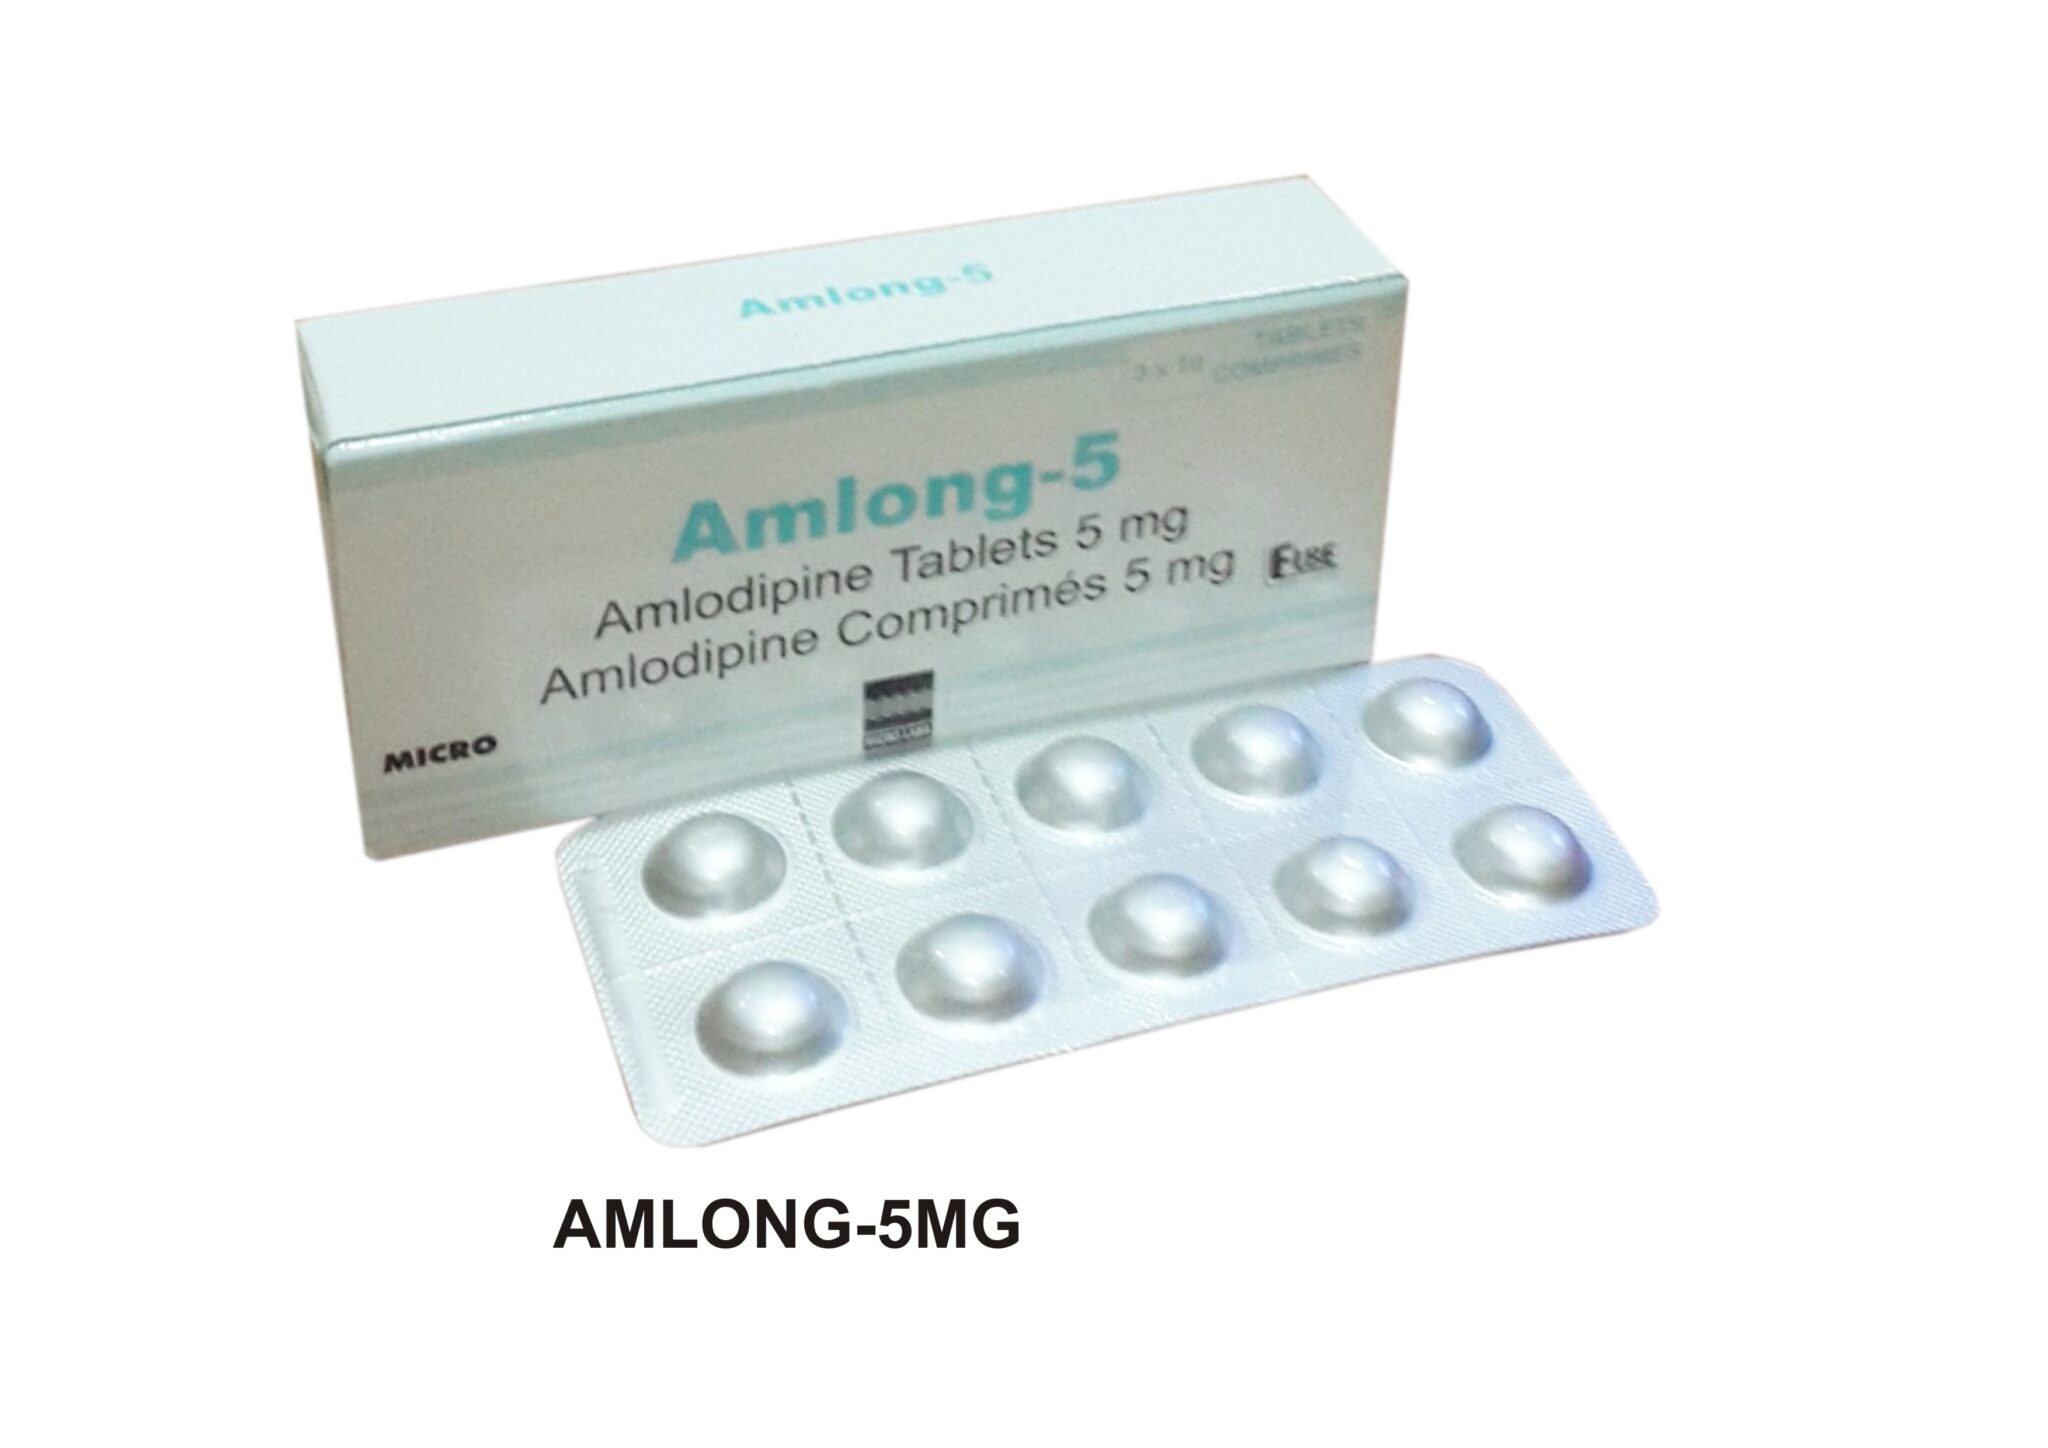 development-of-amlodipine-and-enalapril-combined-tablets-based-on